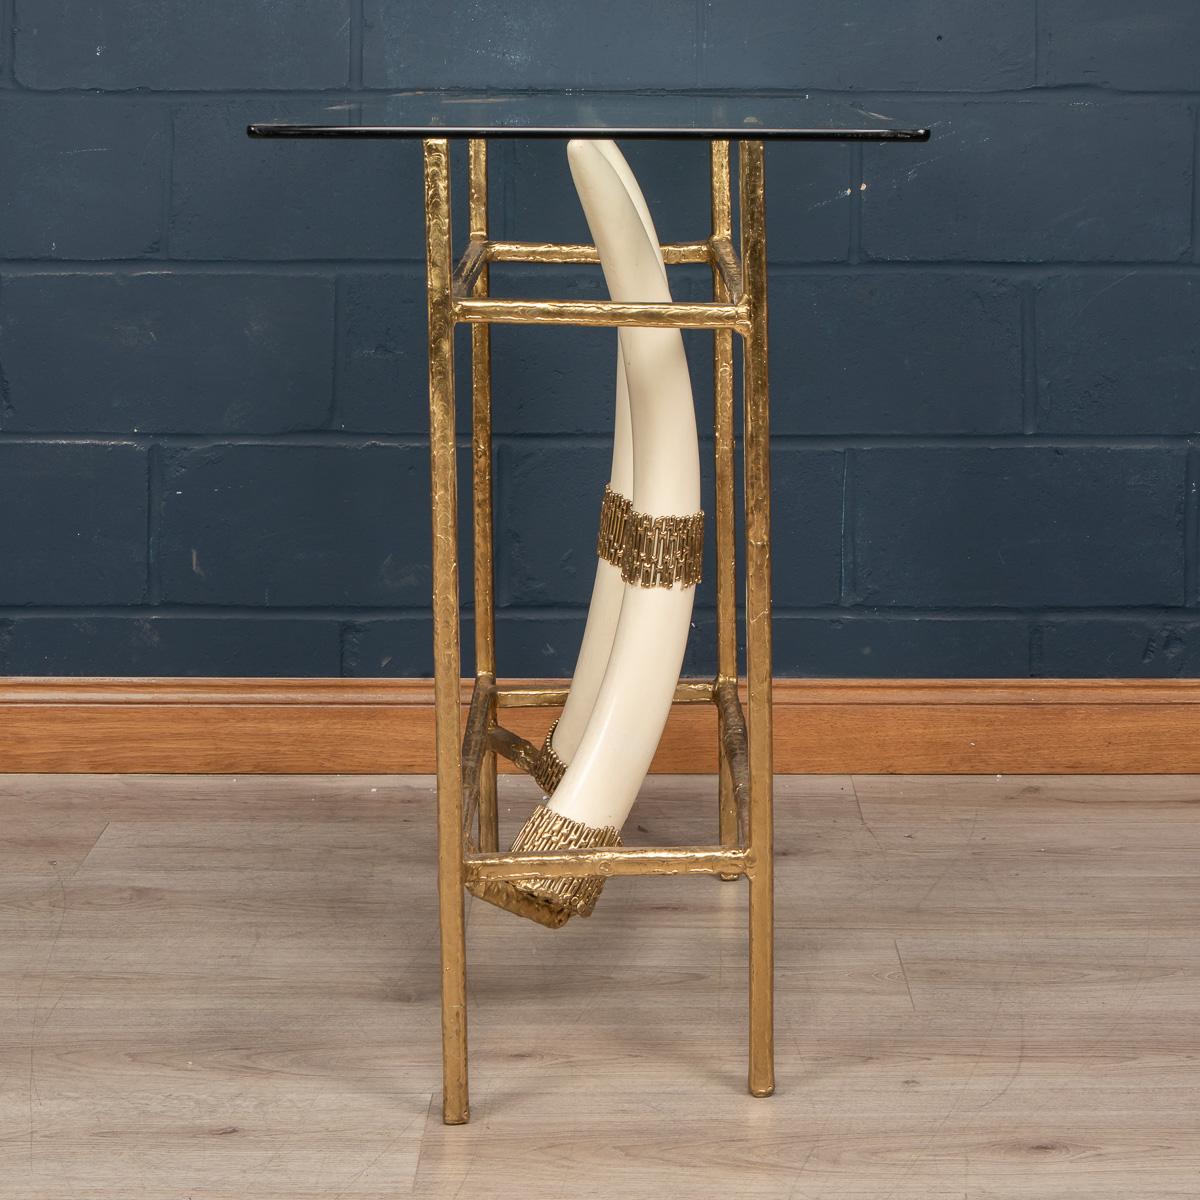 20th Century French Resin Tusks Console Table by Henri Fernandez, c.1970 In Good Condition For Sale In Royal Tunbridge Wells, Kent